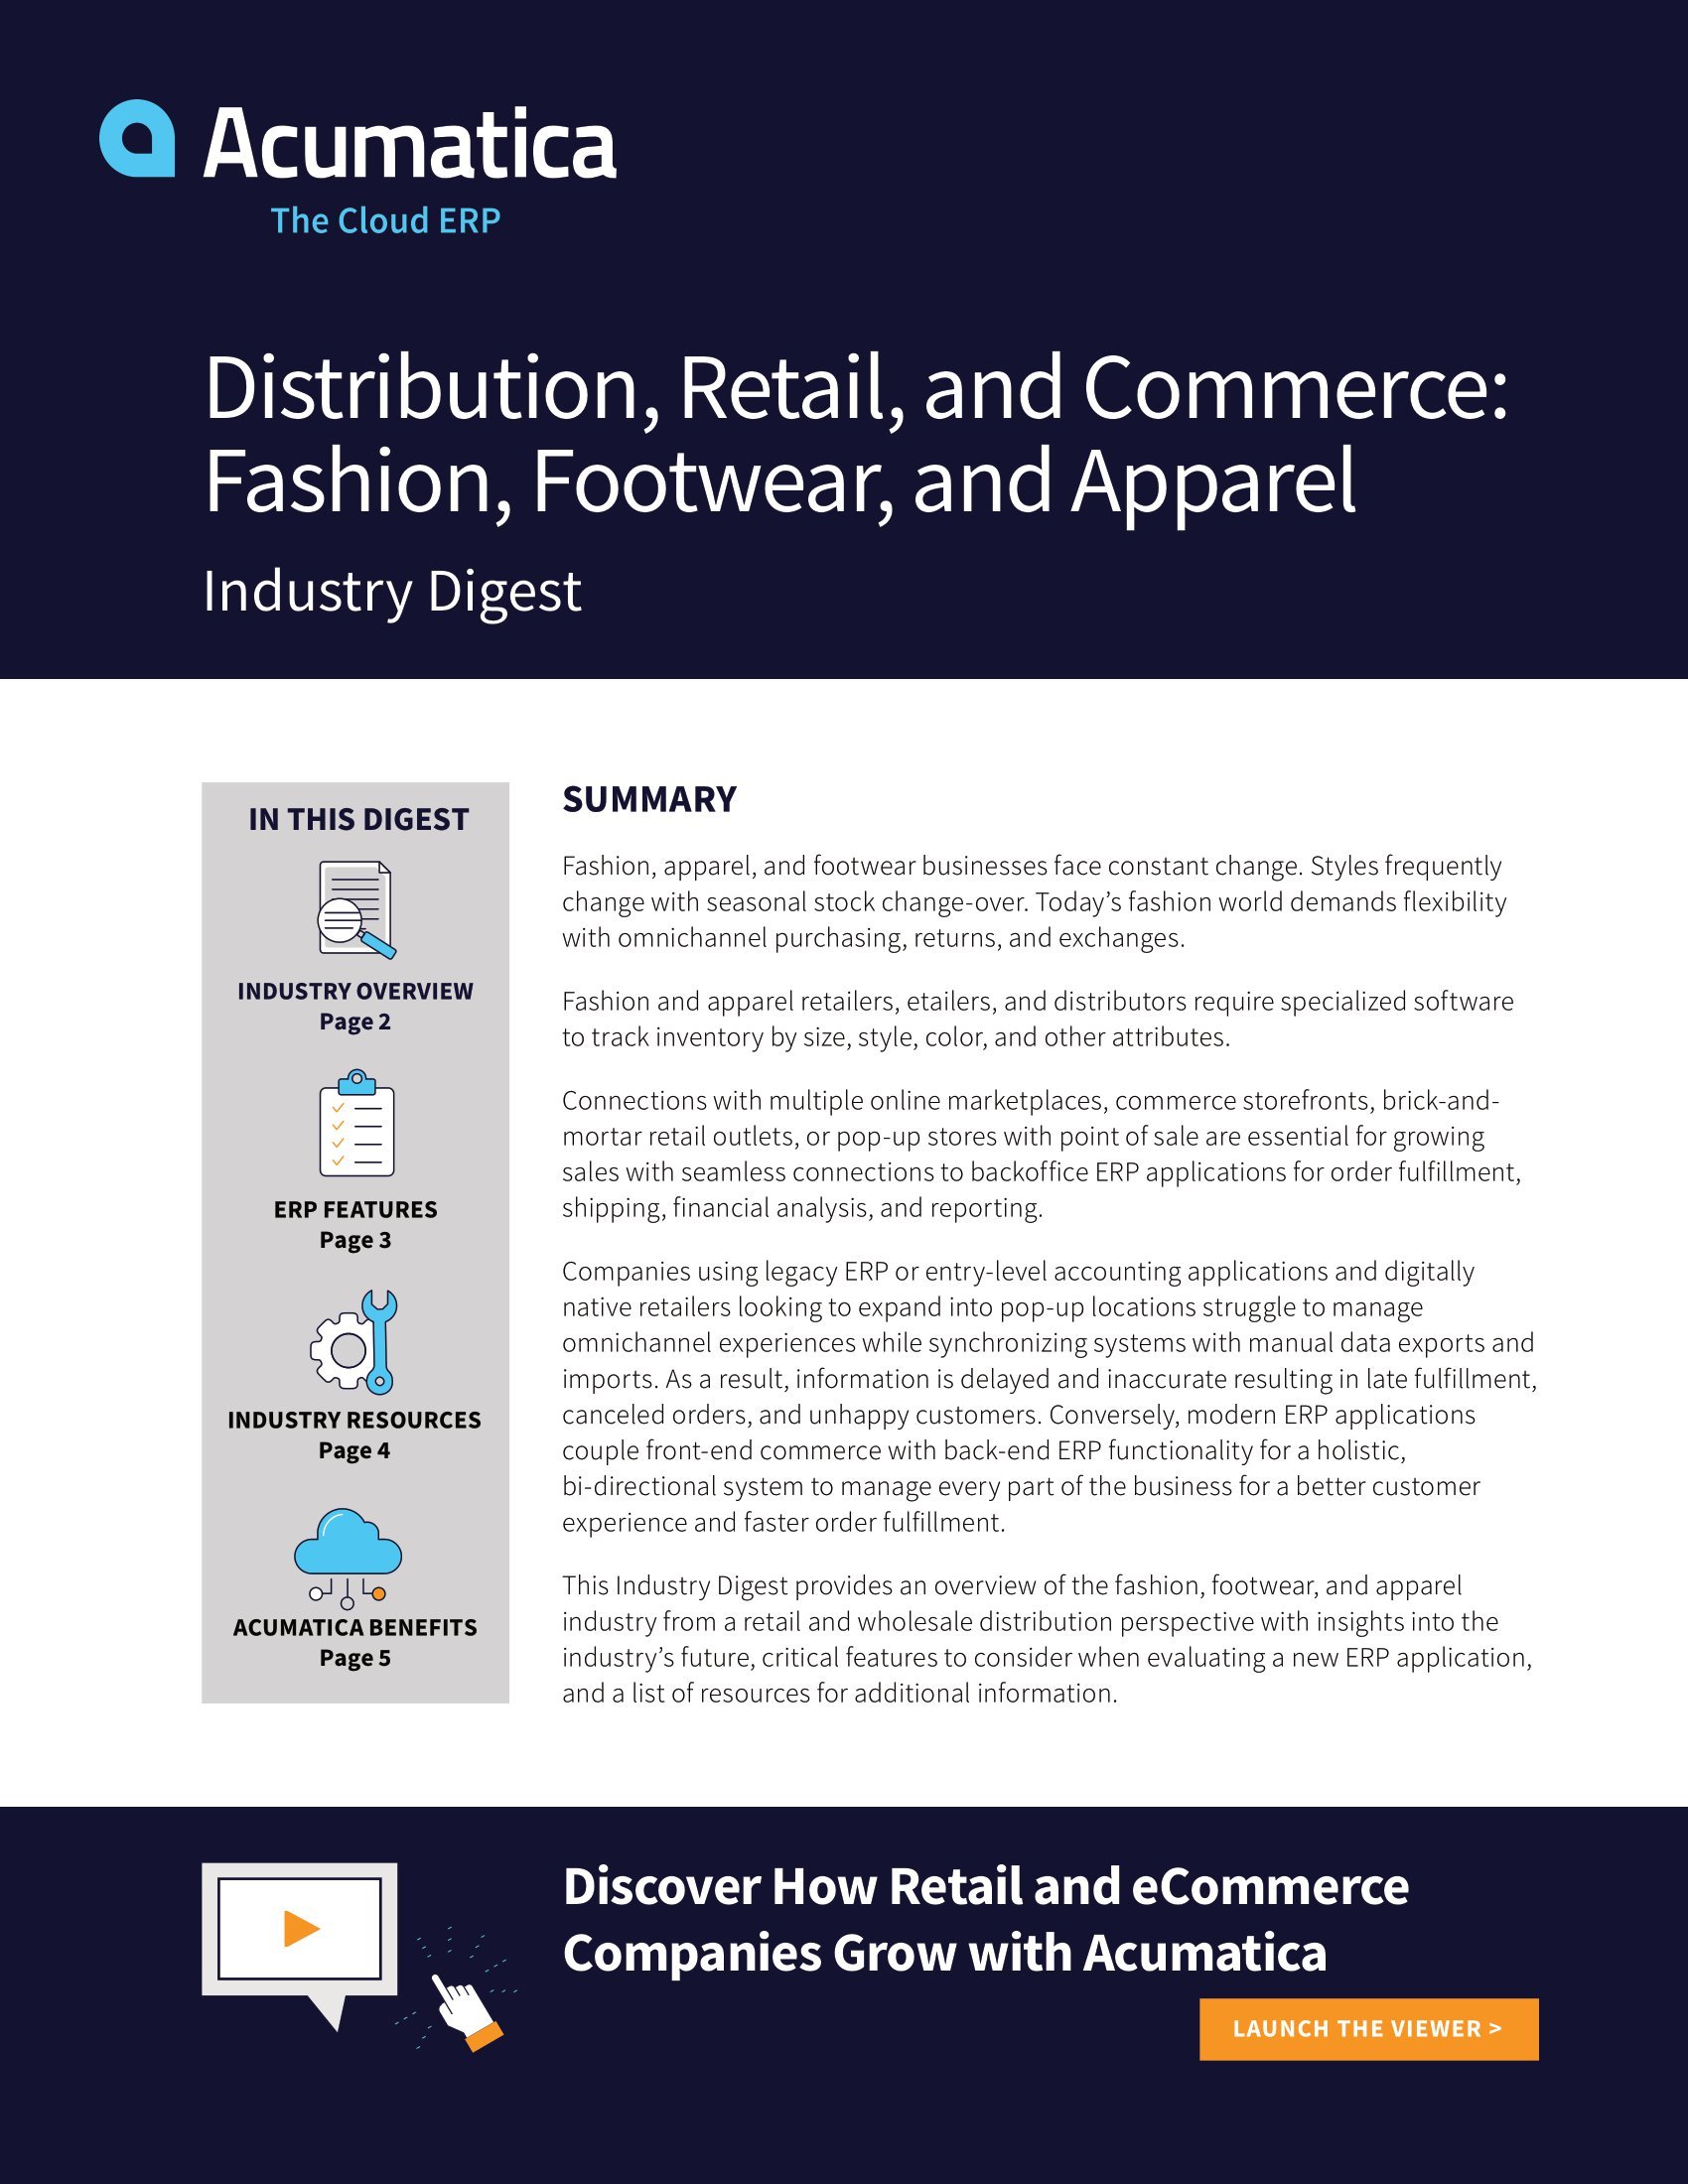 Specialized Software for Fashion, Footwear, and Apparel Businesses, page 0